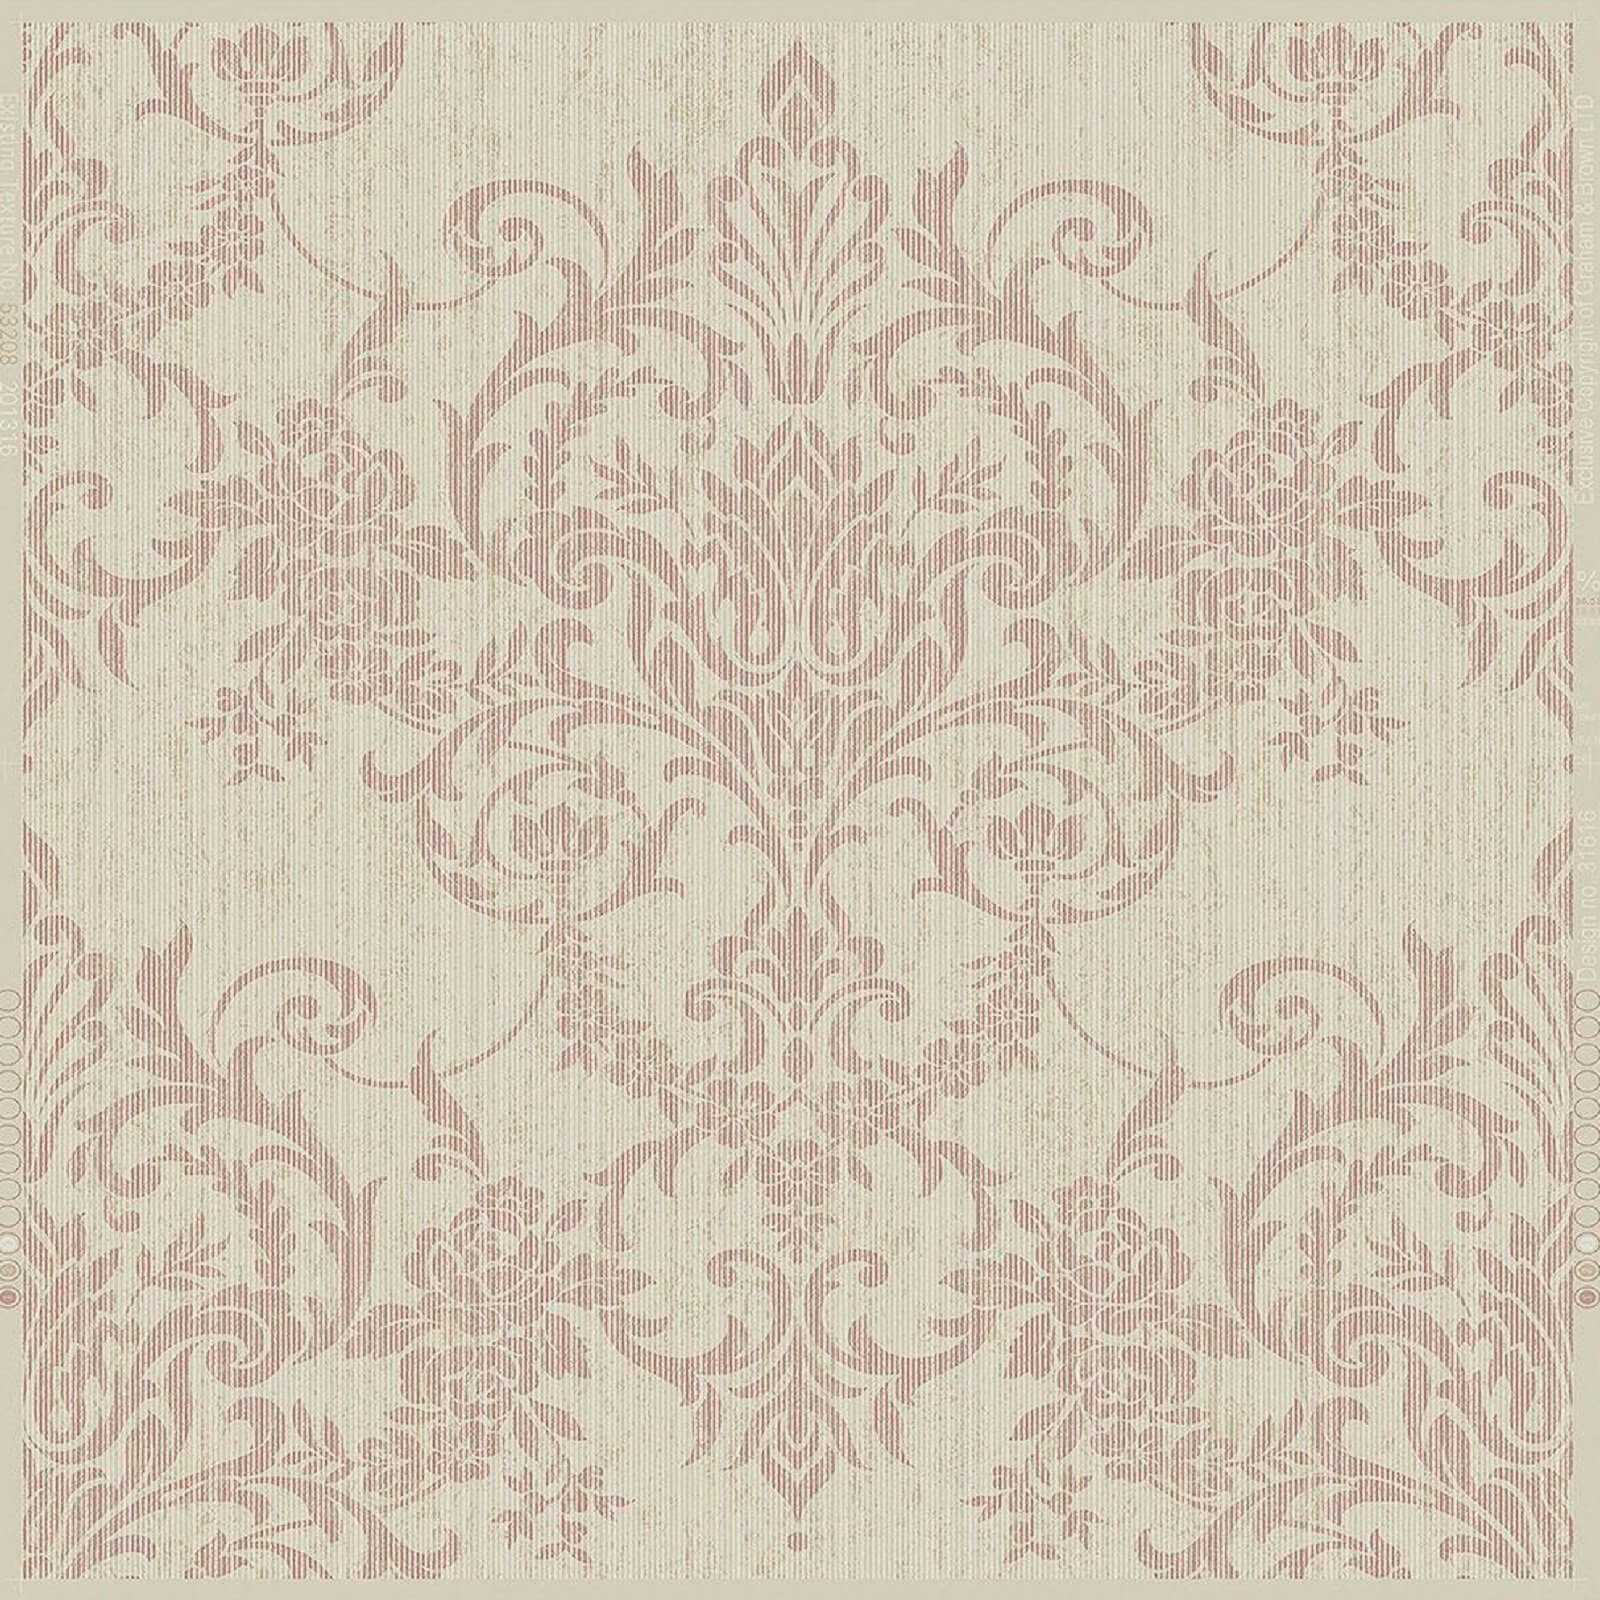 Photo of Superfresco Easy Paste The Wall Victorian Damask Wallpaper - Rose Gold